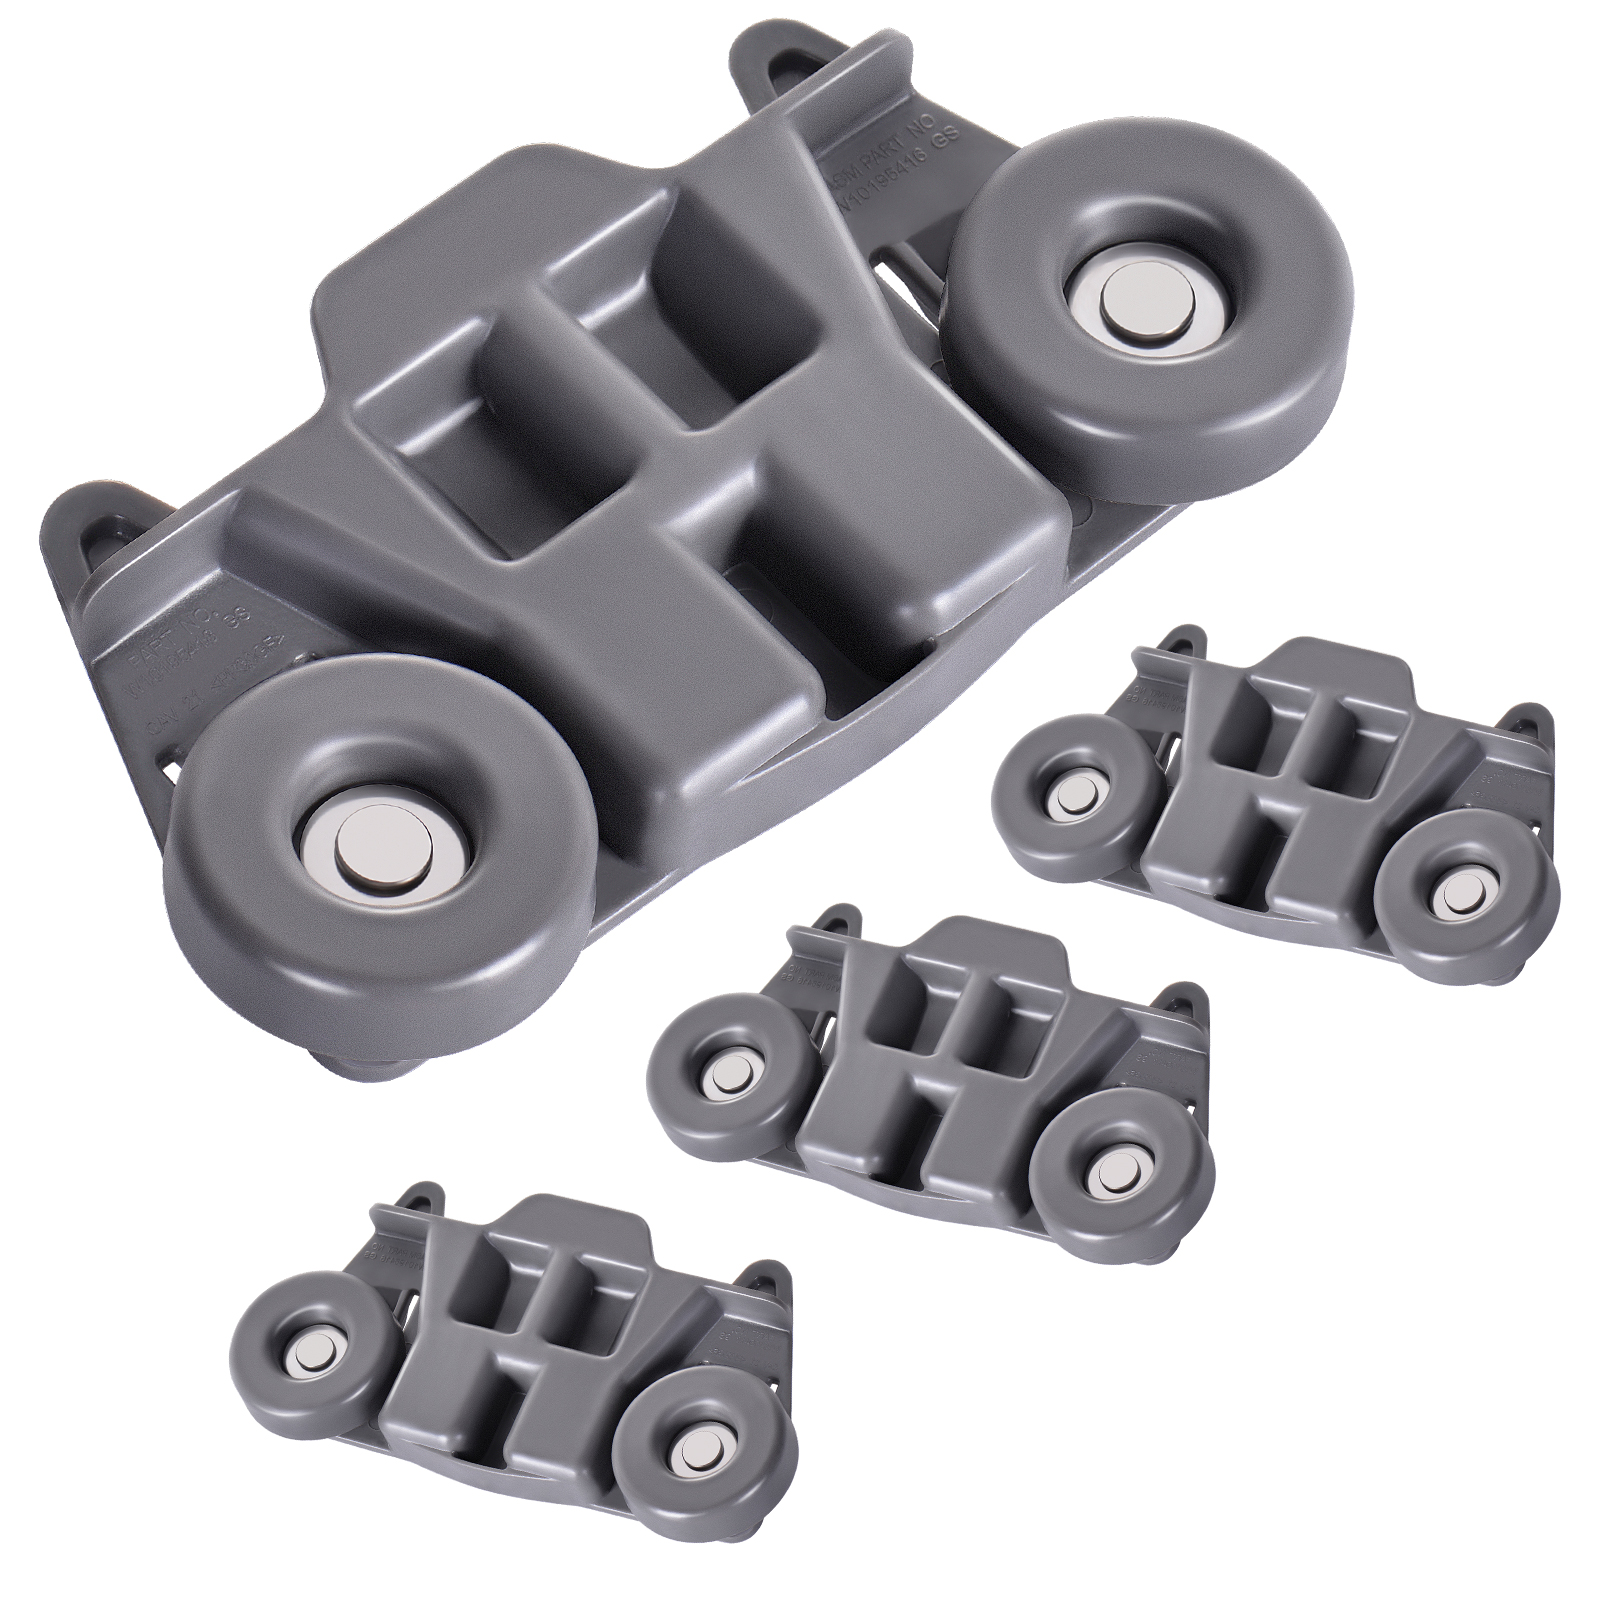 W10195416 NEW UPGRADED Replacement Part for Lower Dishwasher Wheel (4-pack) 